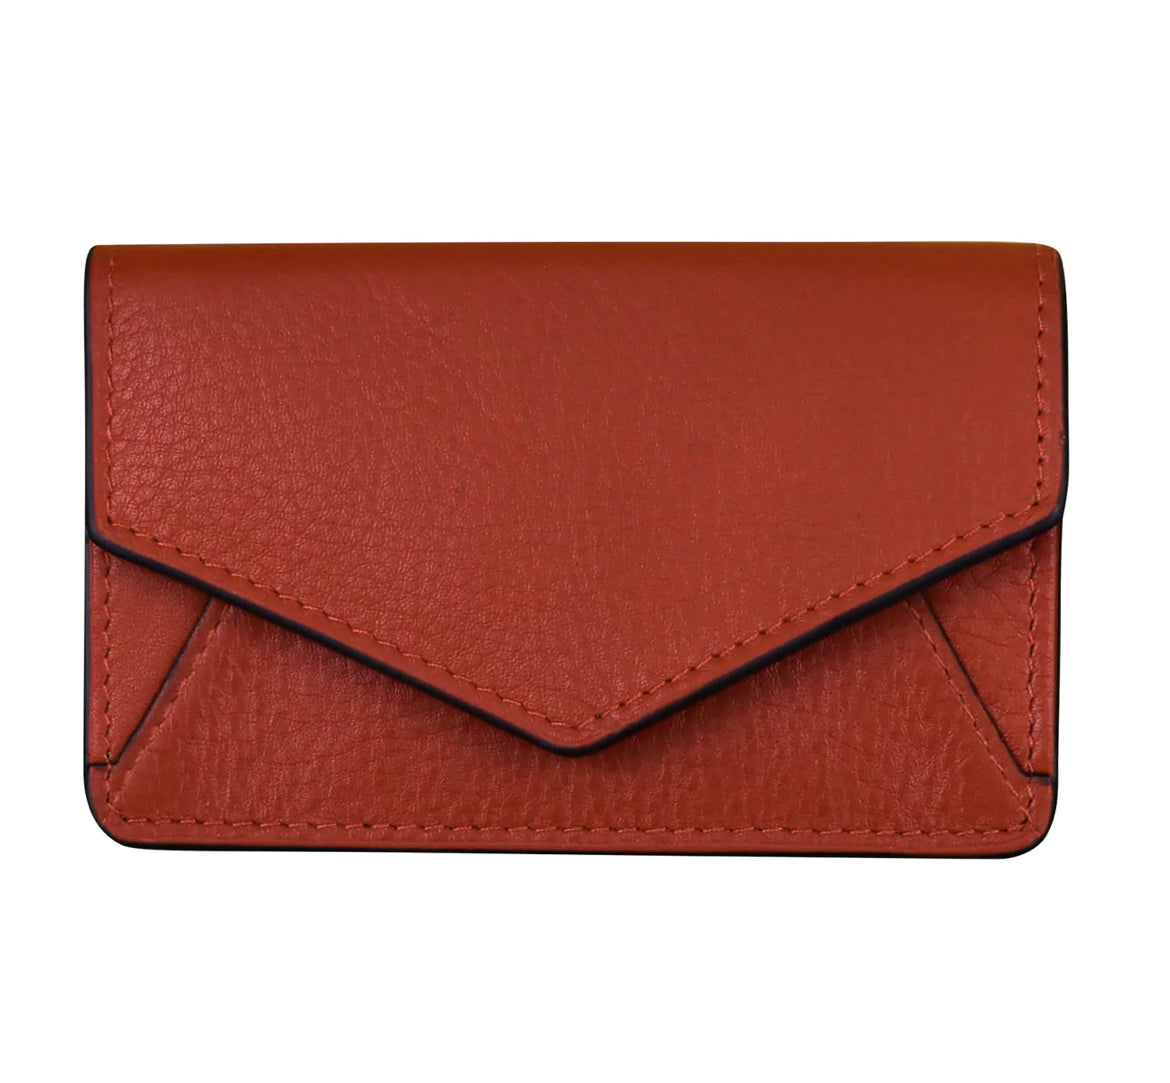 ili New York RFID Card Case Leather Wallet/Coin Purse (Red/Black)